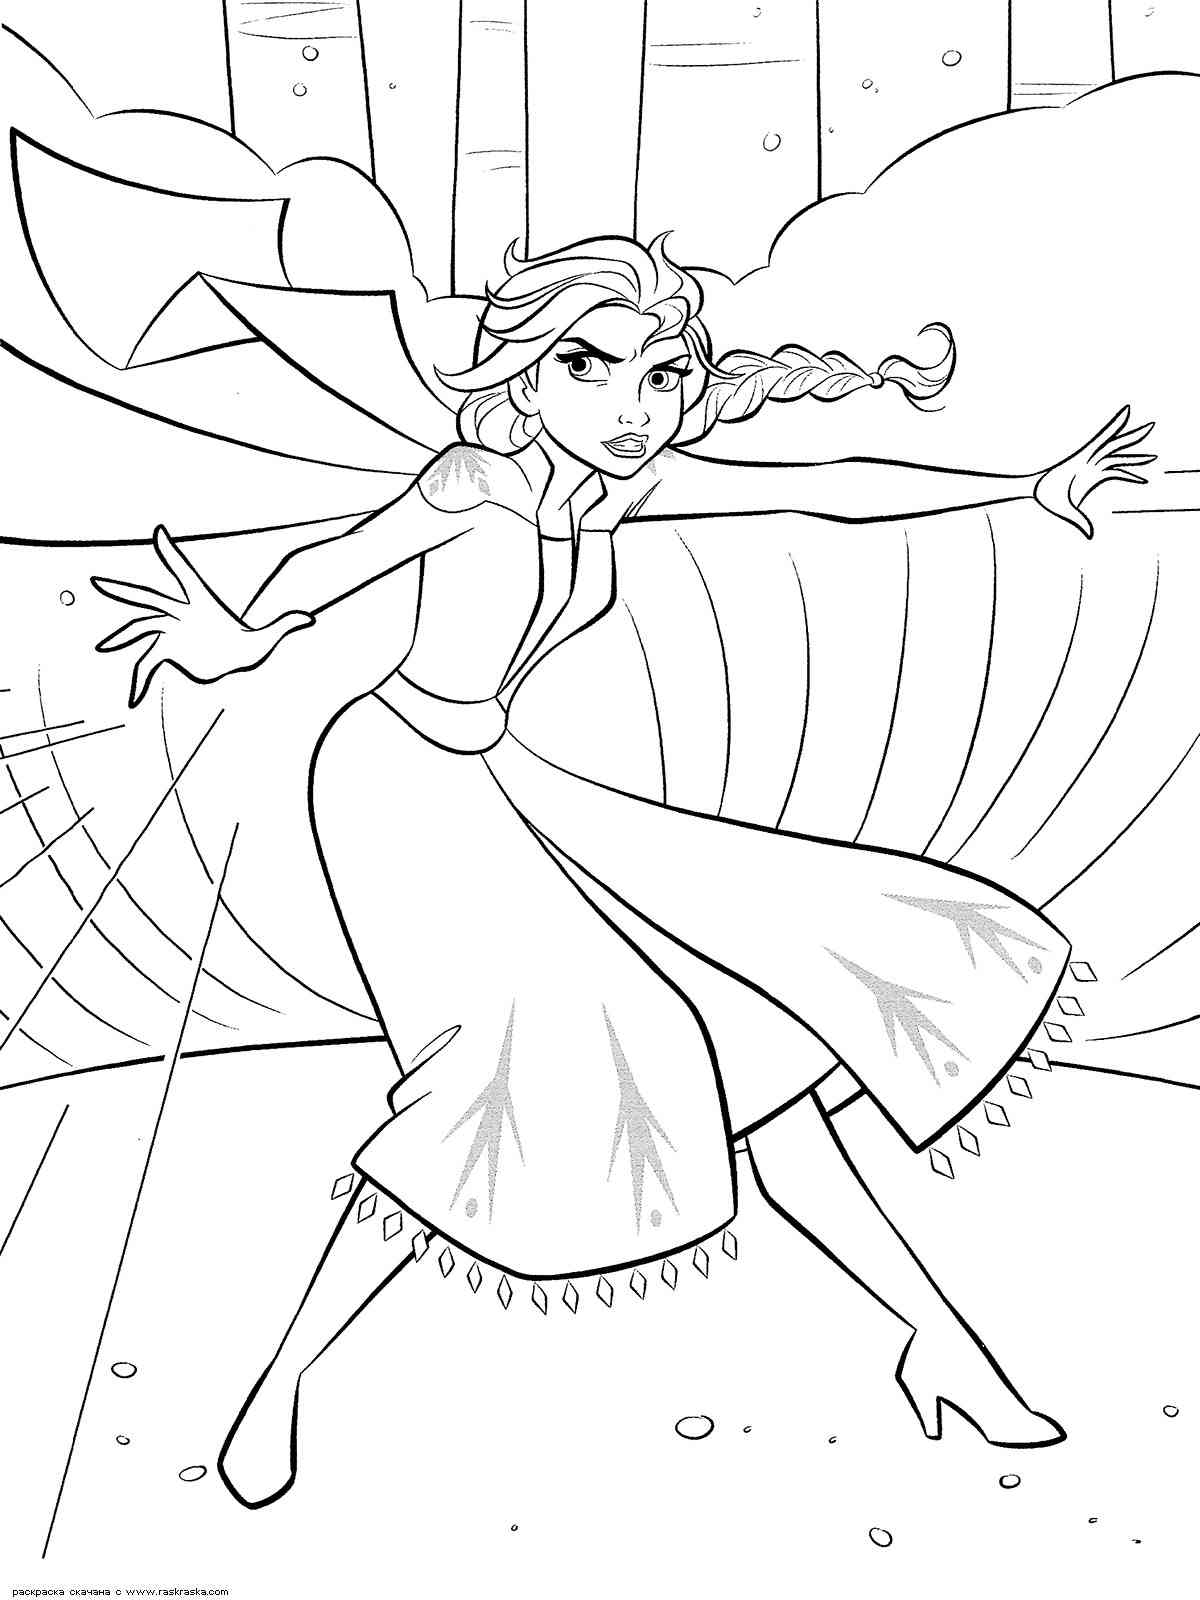 Frozen 4 coloring page